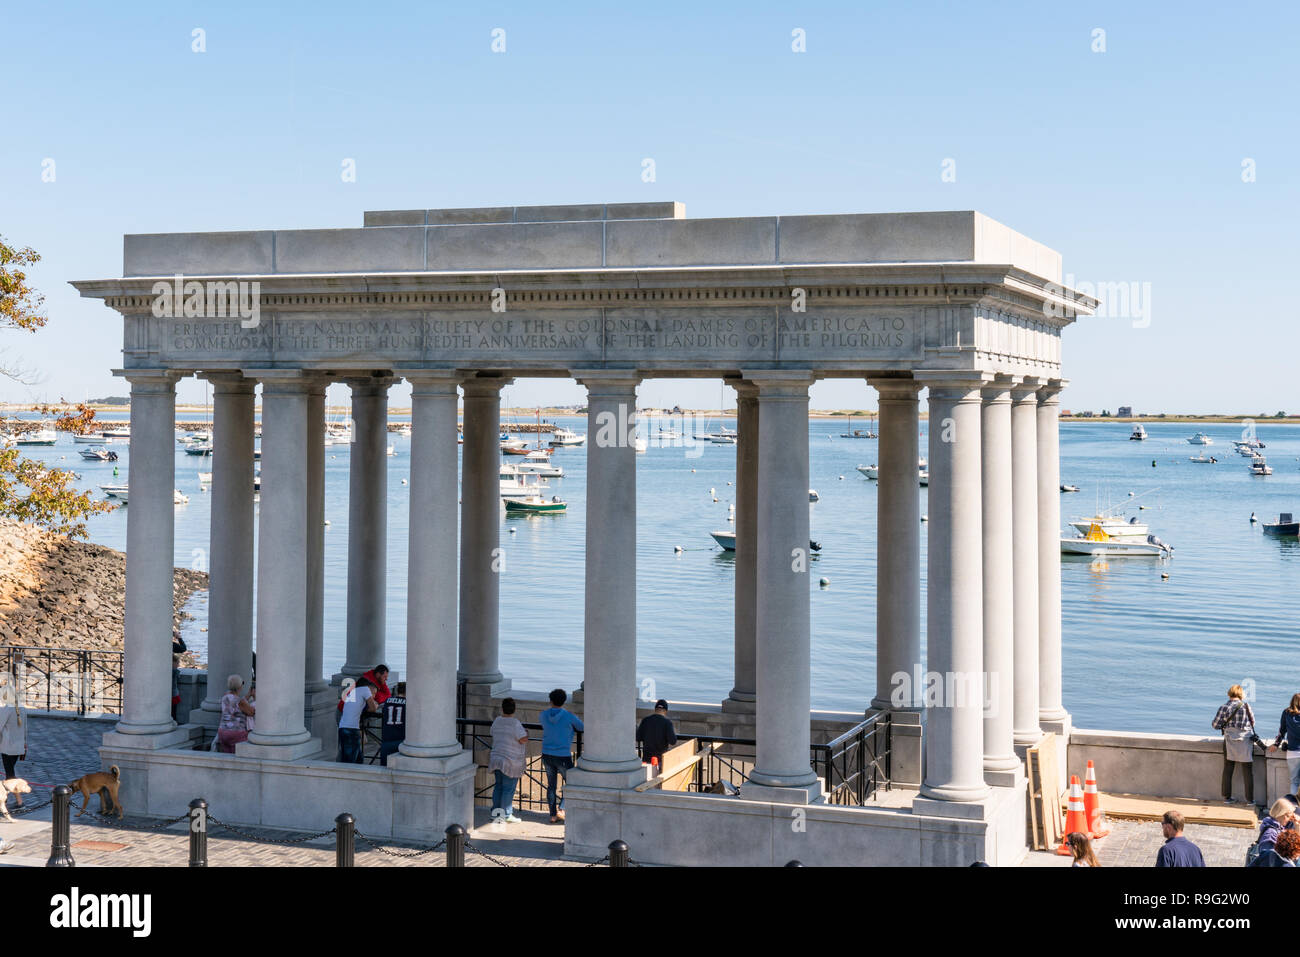 PLYMOUTH, MA - SEPTEMBER 30, 2018: Plymouth Rock Monument site of the pilgrims landing in Plymouth, Massachusetts Stock Photo